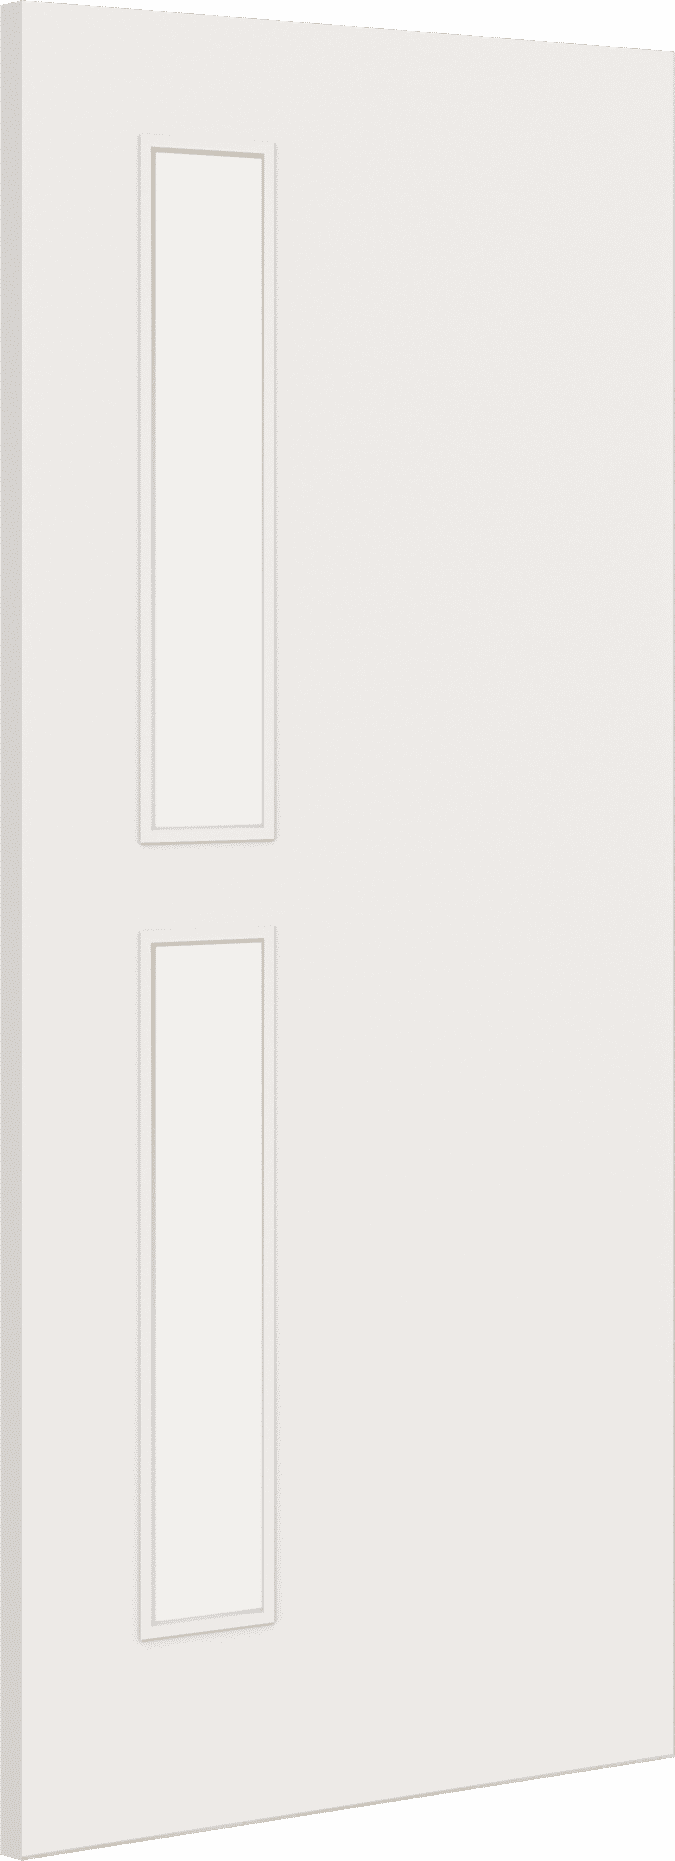 1981mm x 914mm x 44mm (36") Architectural Paint Grade White 07 Clear Glazed Fire Door Blank